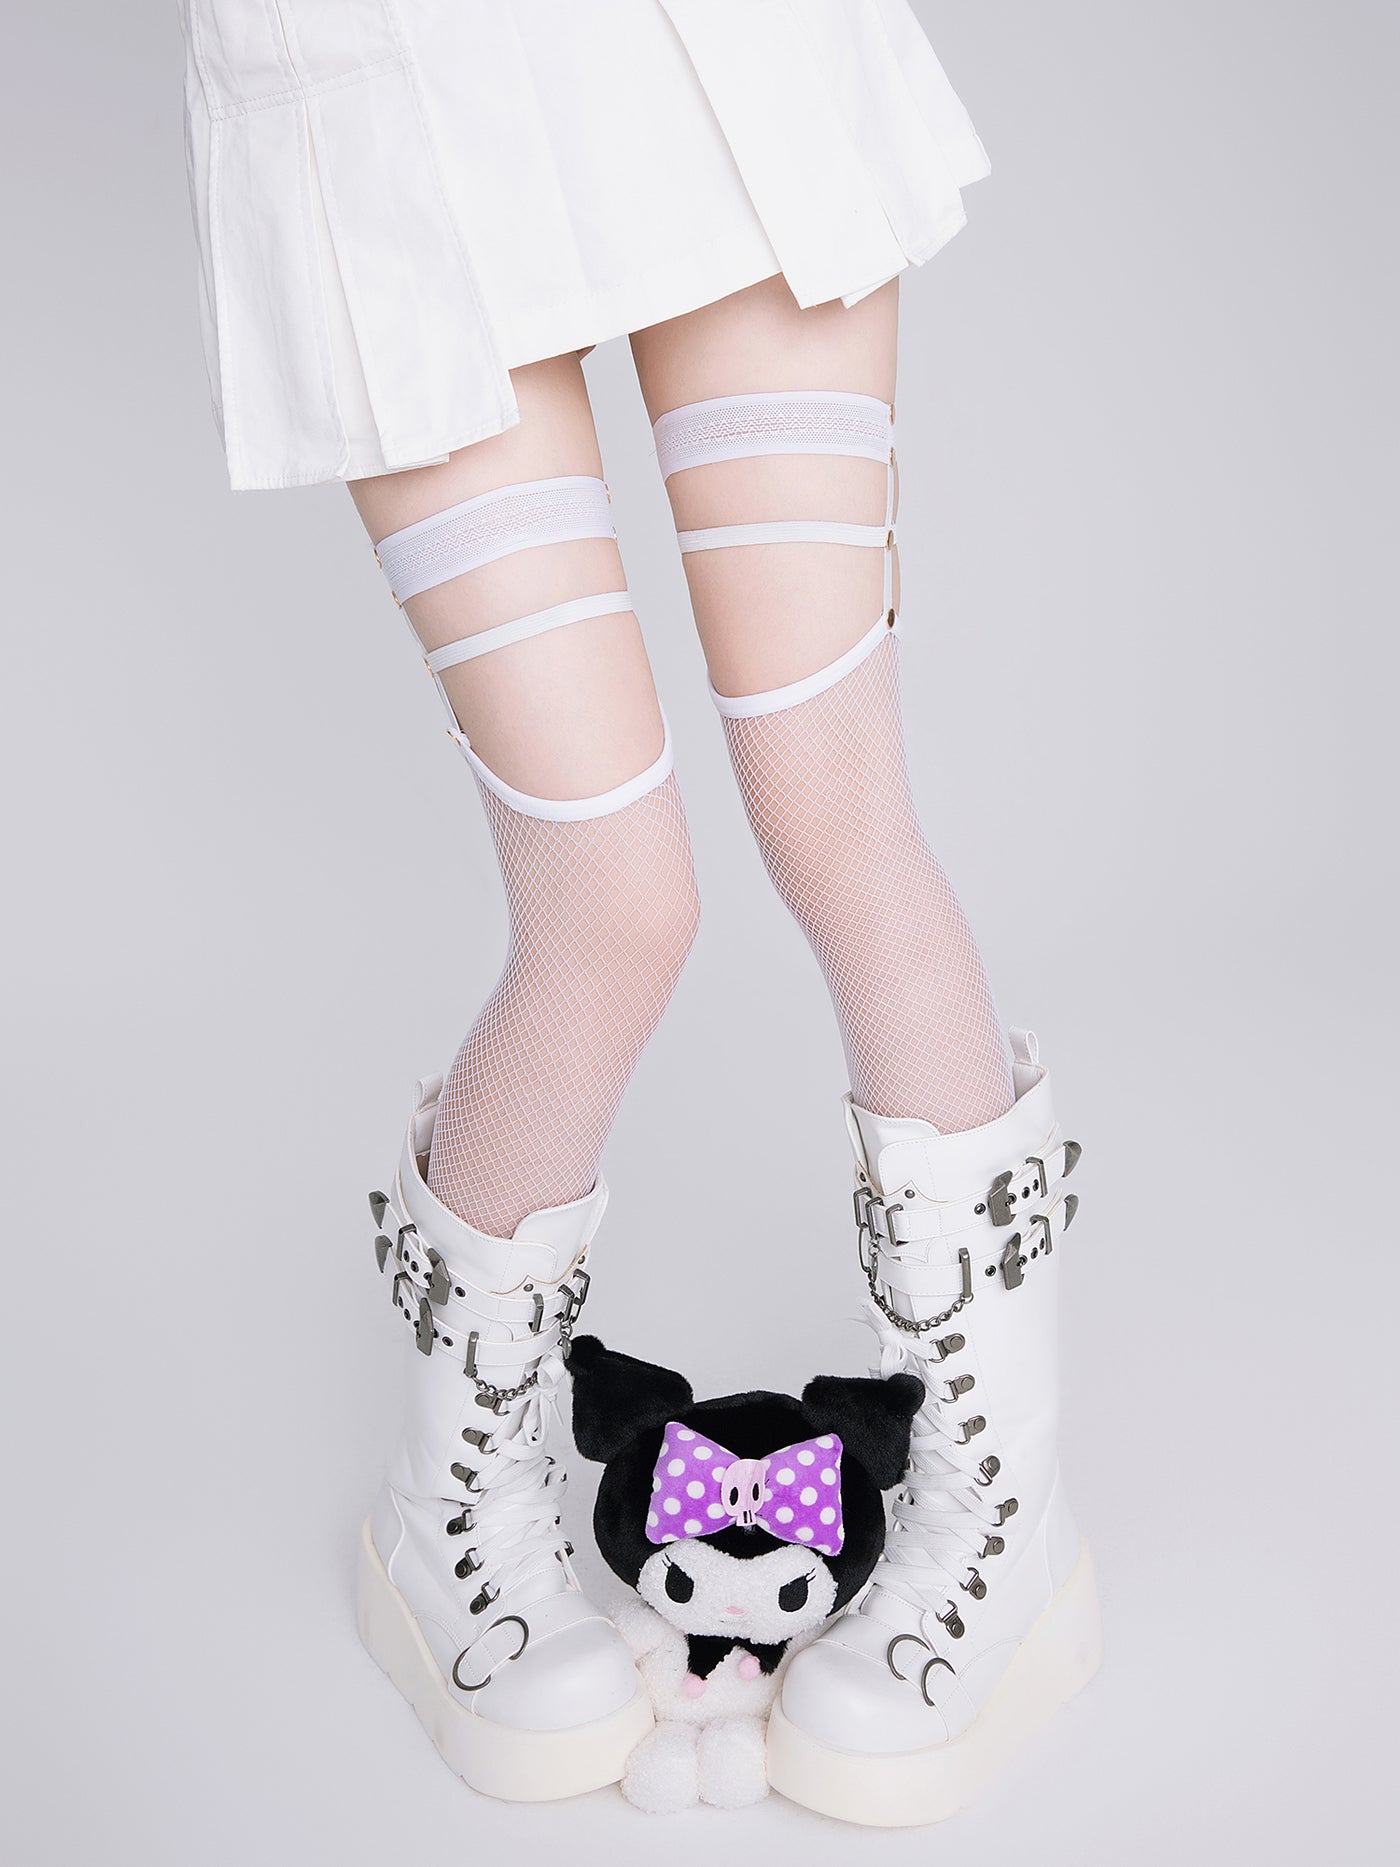 Arrive on the first floor~Punk Lolita Lace Stockings free size white 